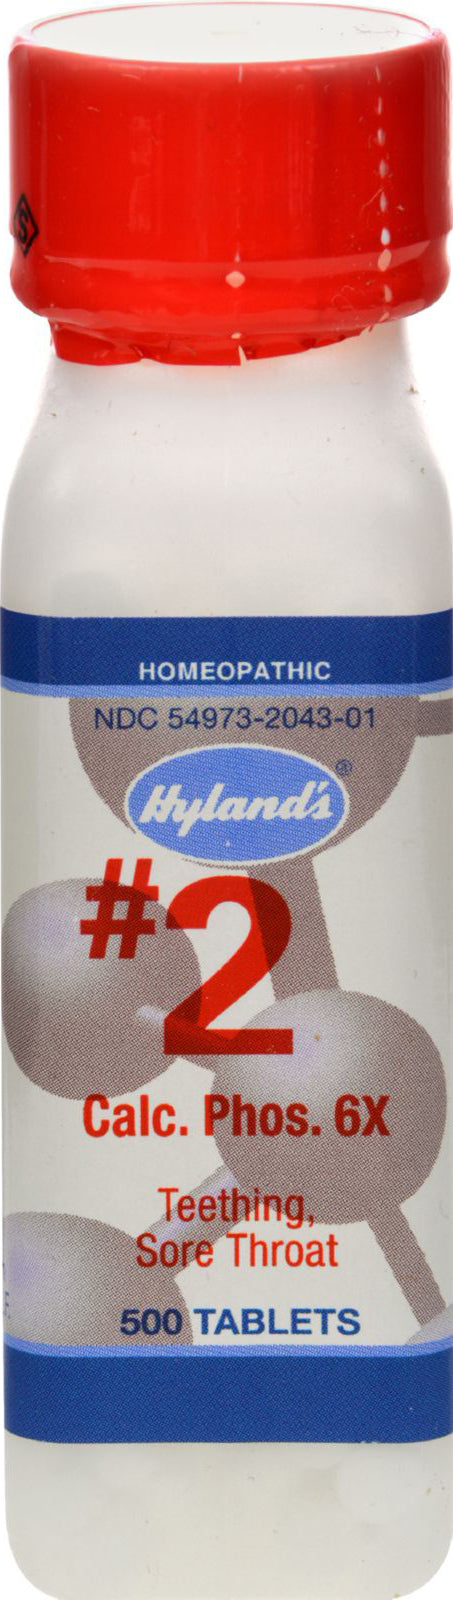 Calcarea Phosphorica 6X, 500 Tablets , Brand_Hyland's Homeopathic Form_Tablets Size_500 Tabs